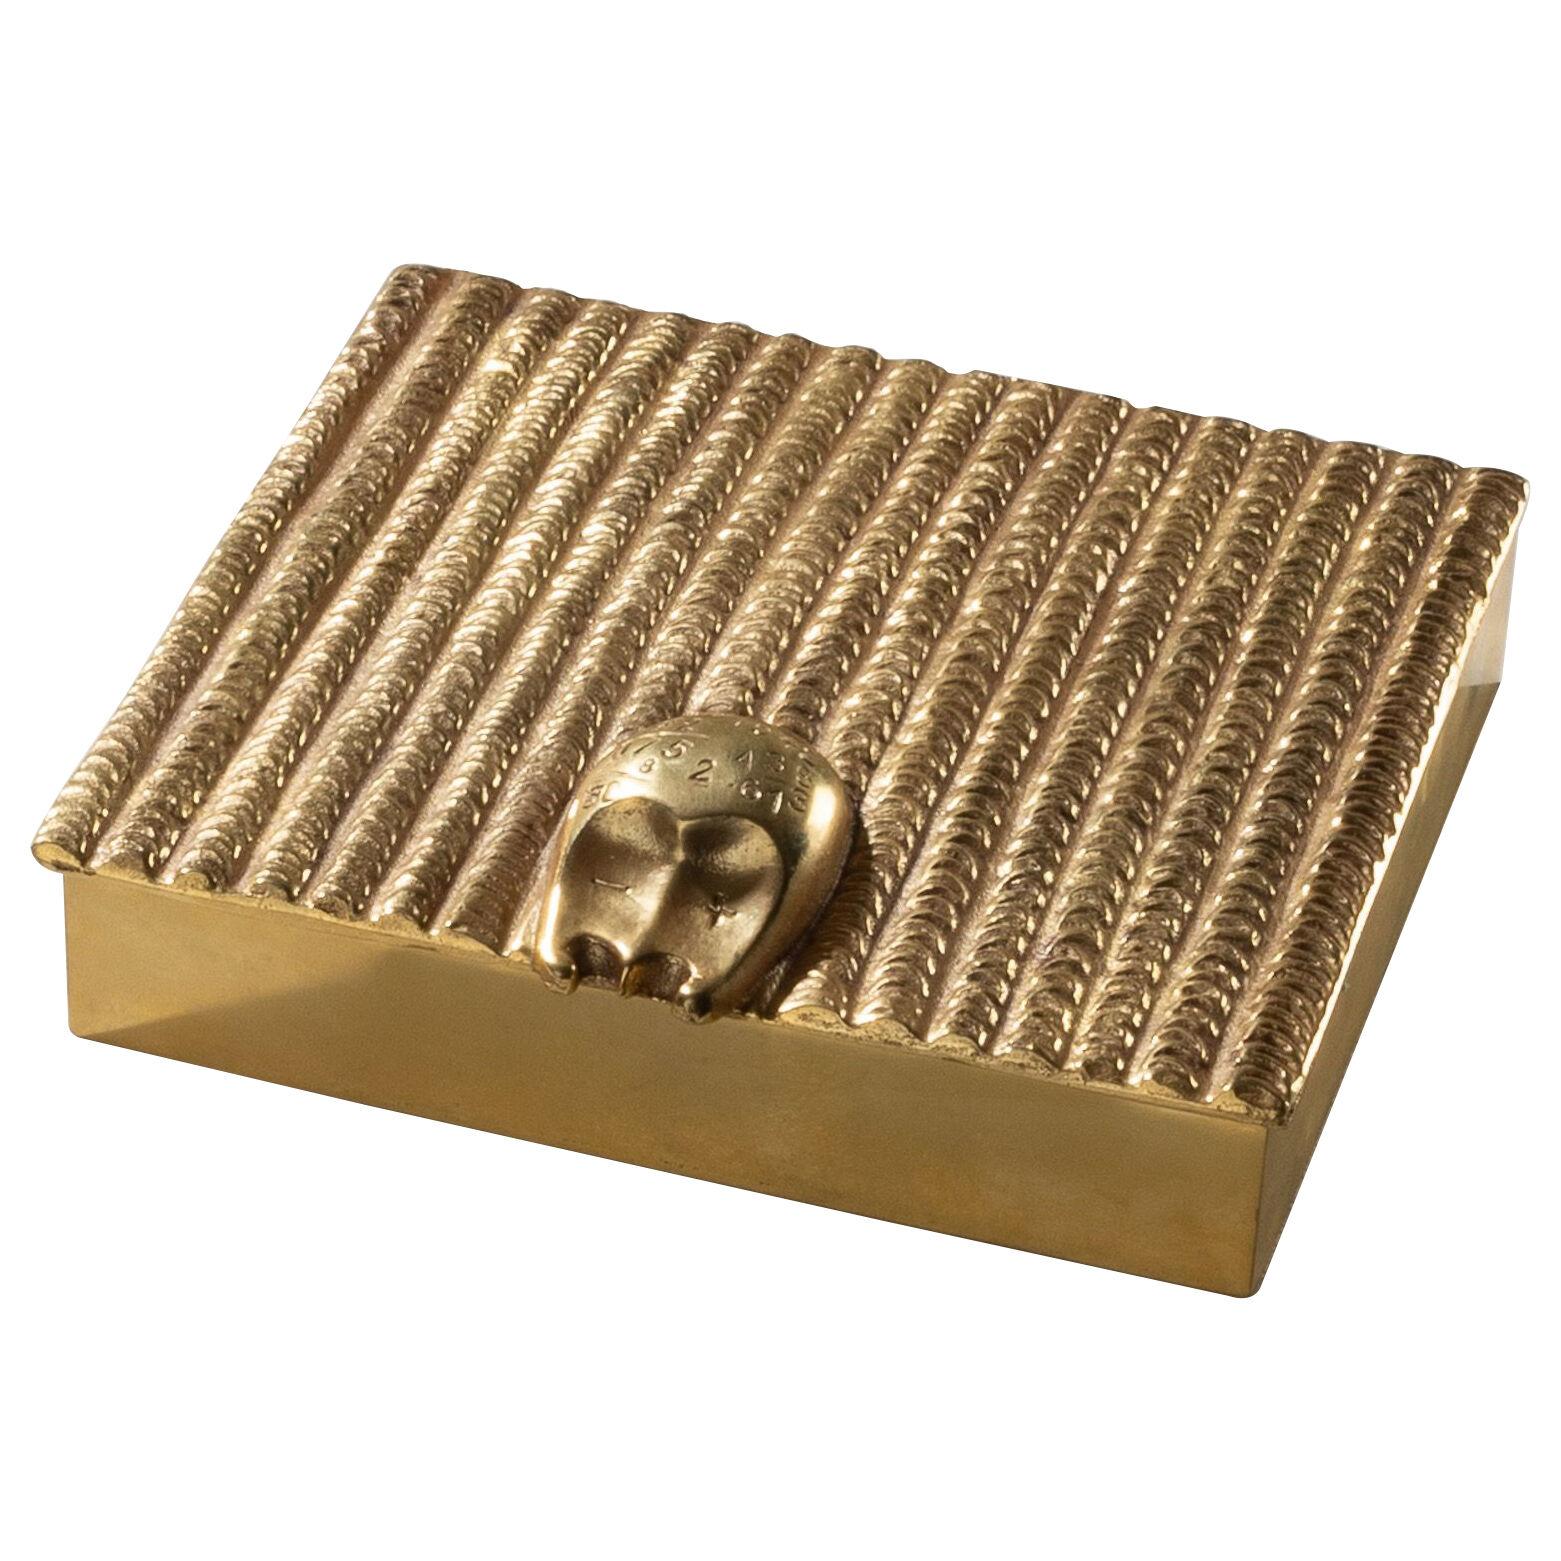 Le comptable (The accountant) by Line Vautrin – Decorative box in gilded bronze